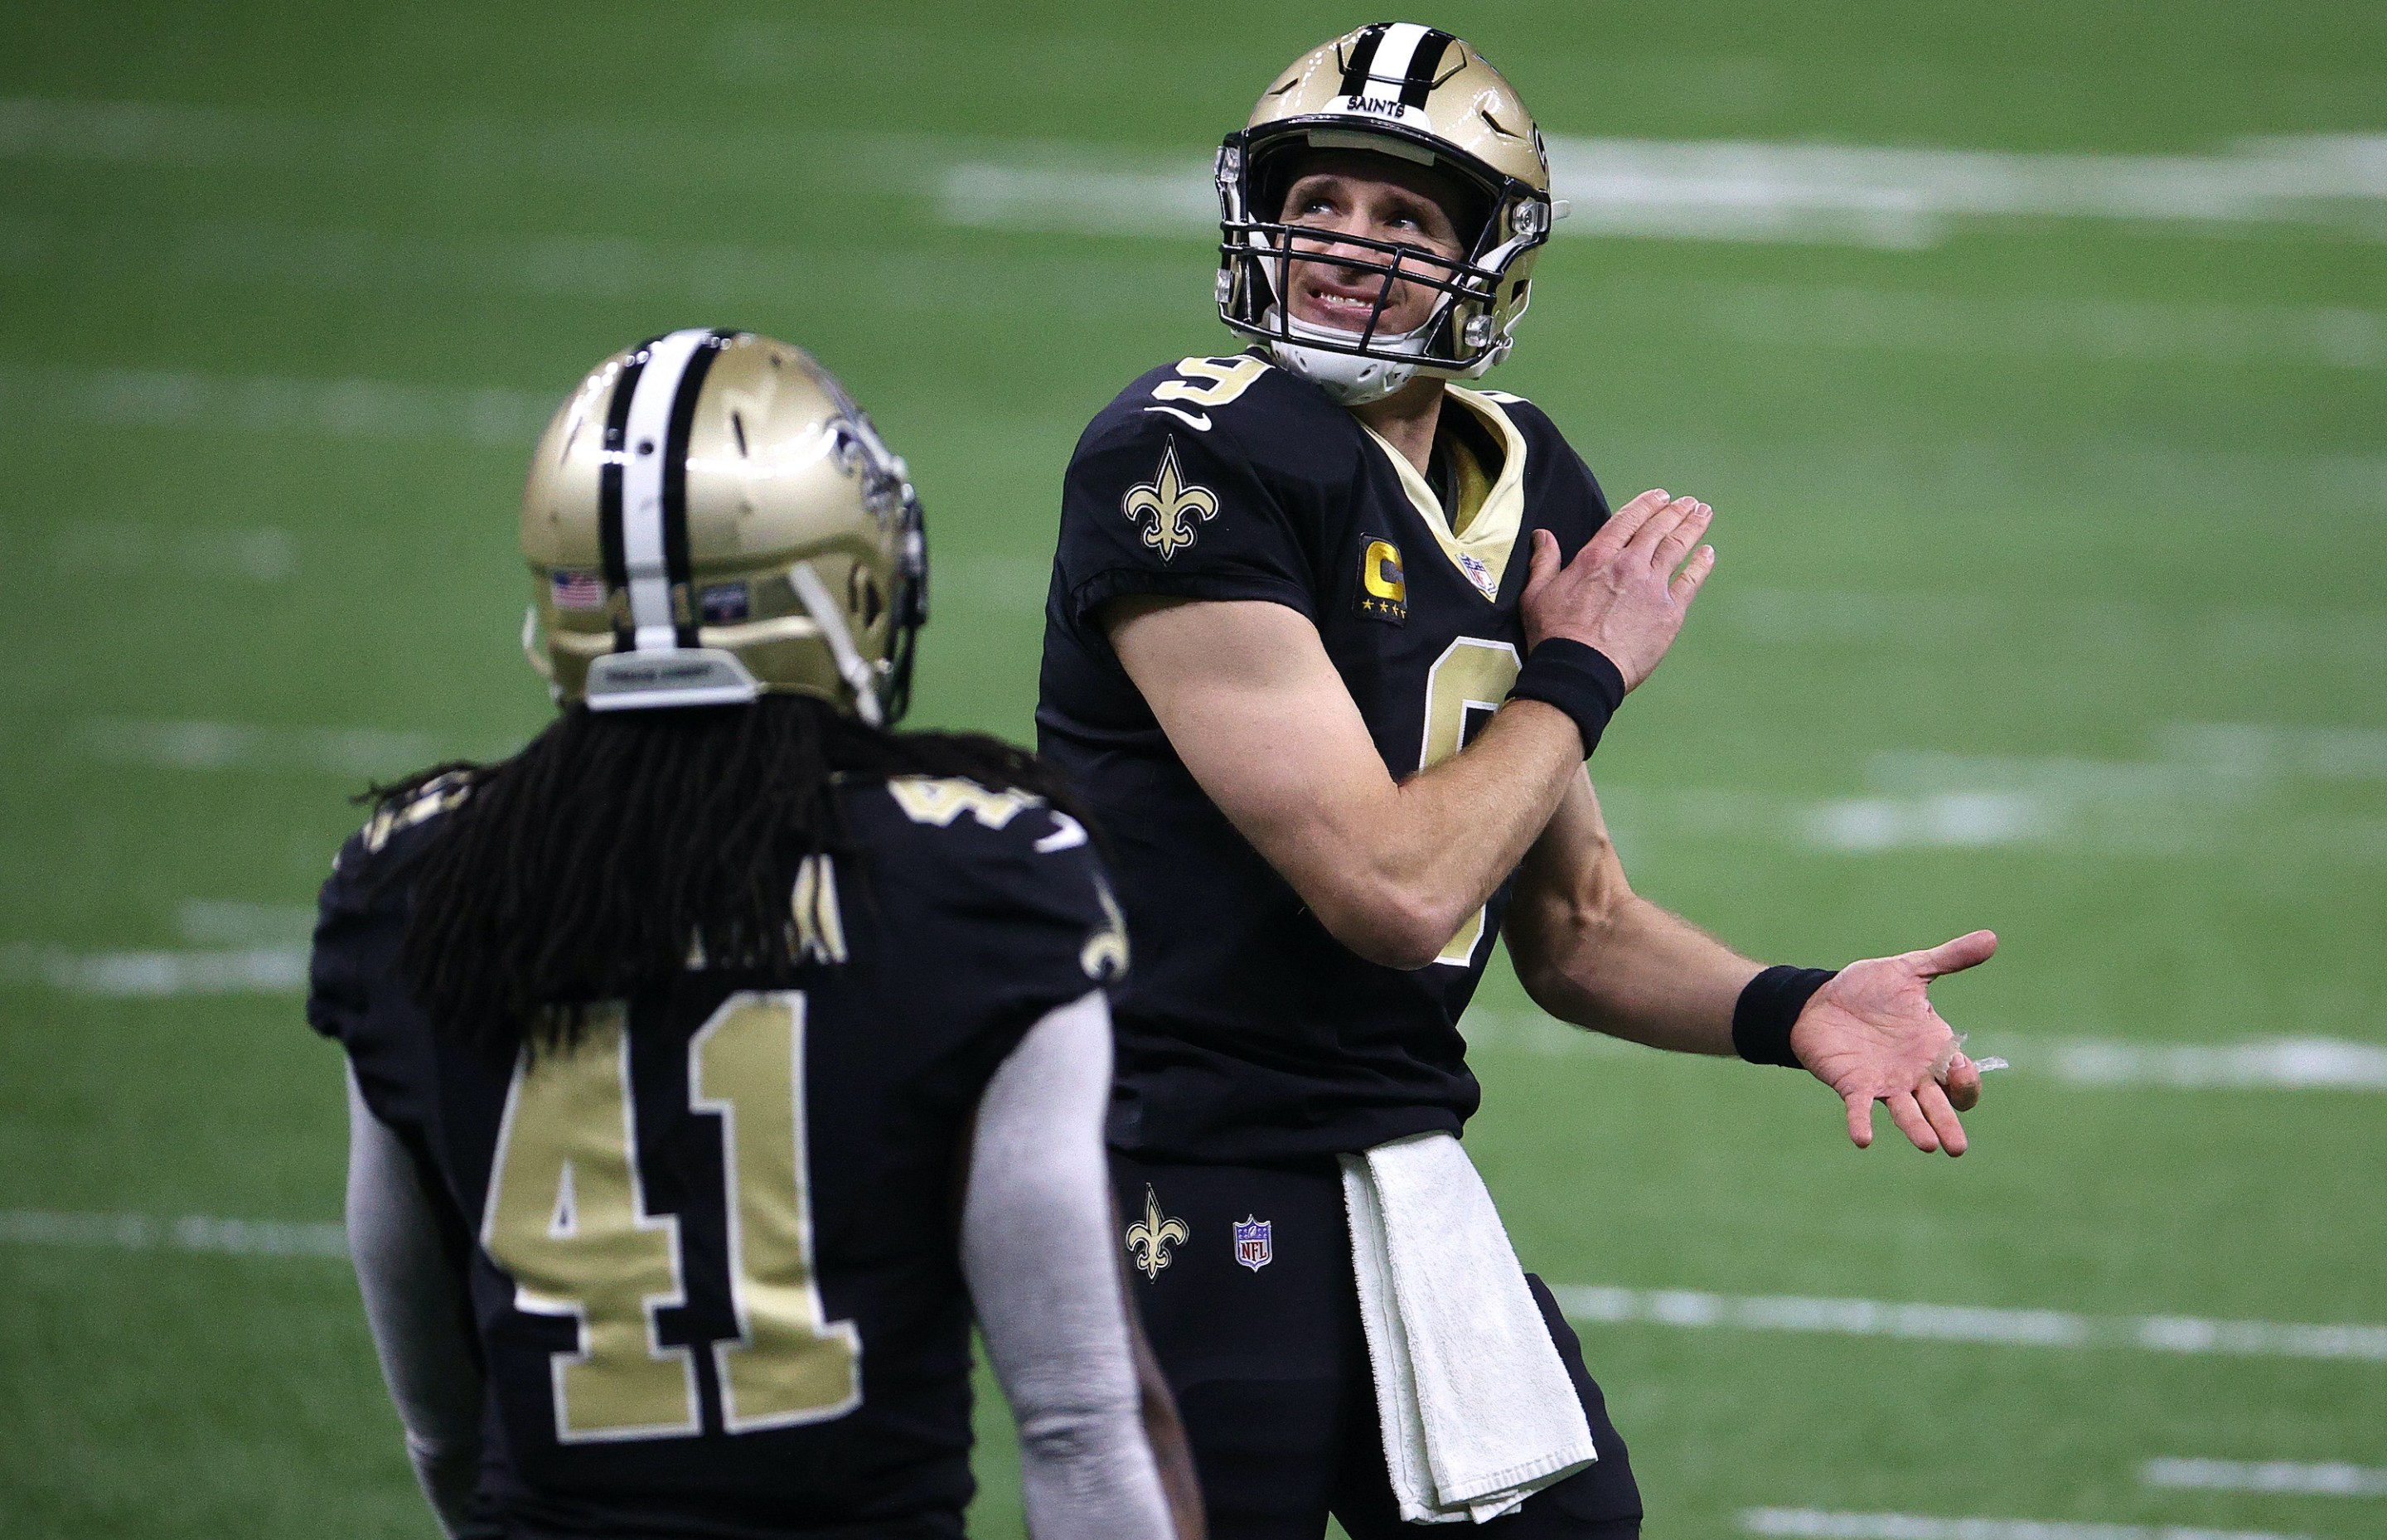 Drew Brees #9 of the New Orleans Saints reacts to a play against the Tampa Bay Buccaneers during the first quarter in the NFC Divisional Playoff game at Mercedes Benz Superdome on January 17, 2021 in New Orleans, Louisiana.